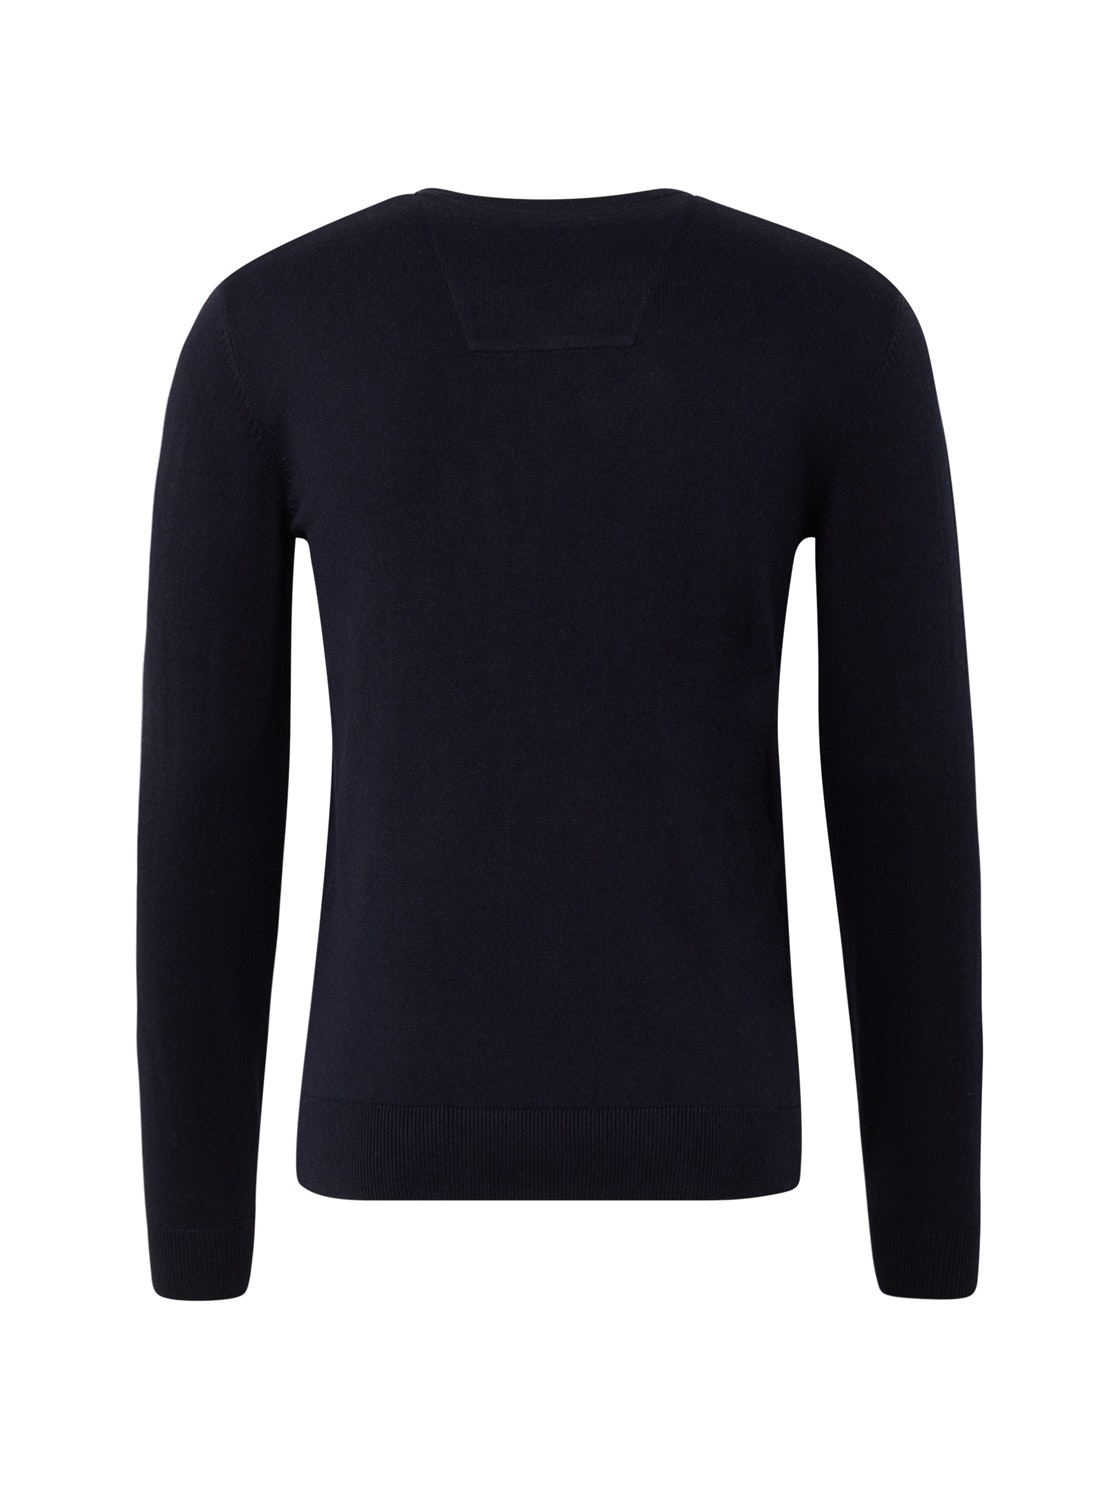 TOM TAILOR Pullover 10537013